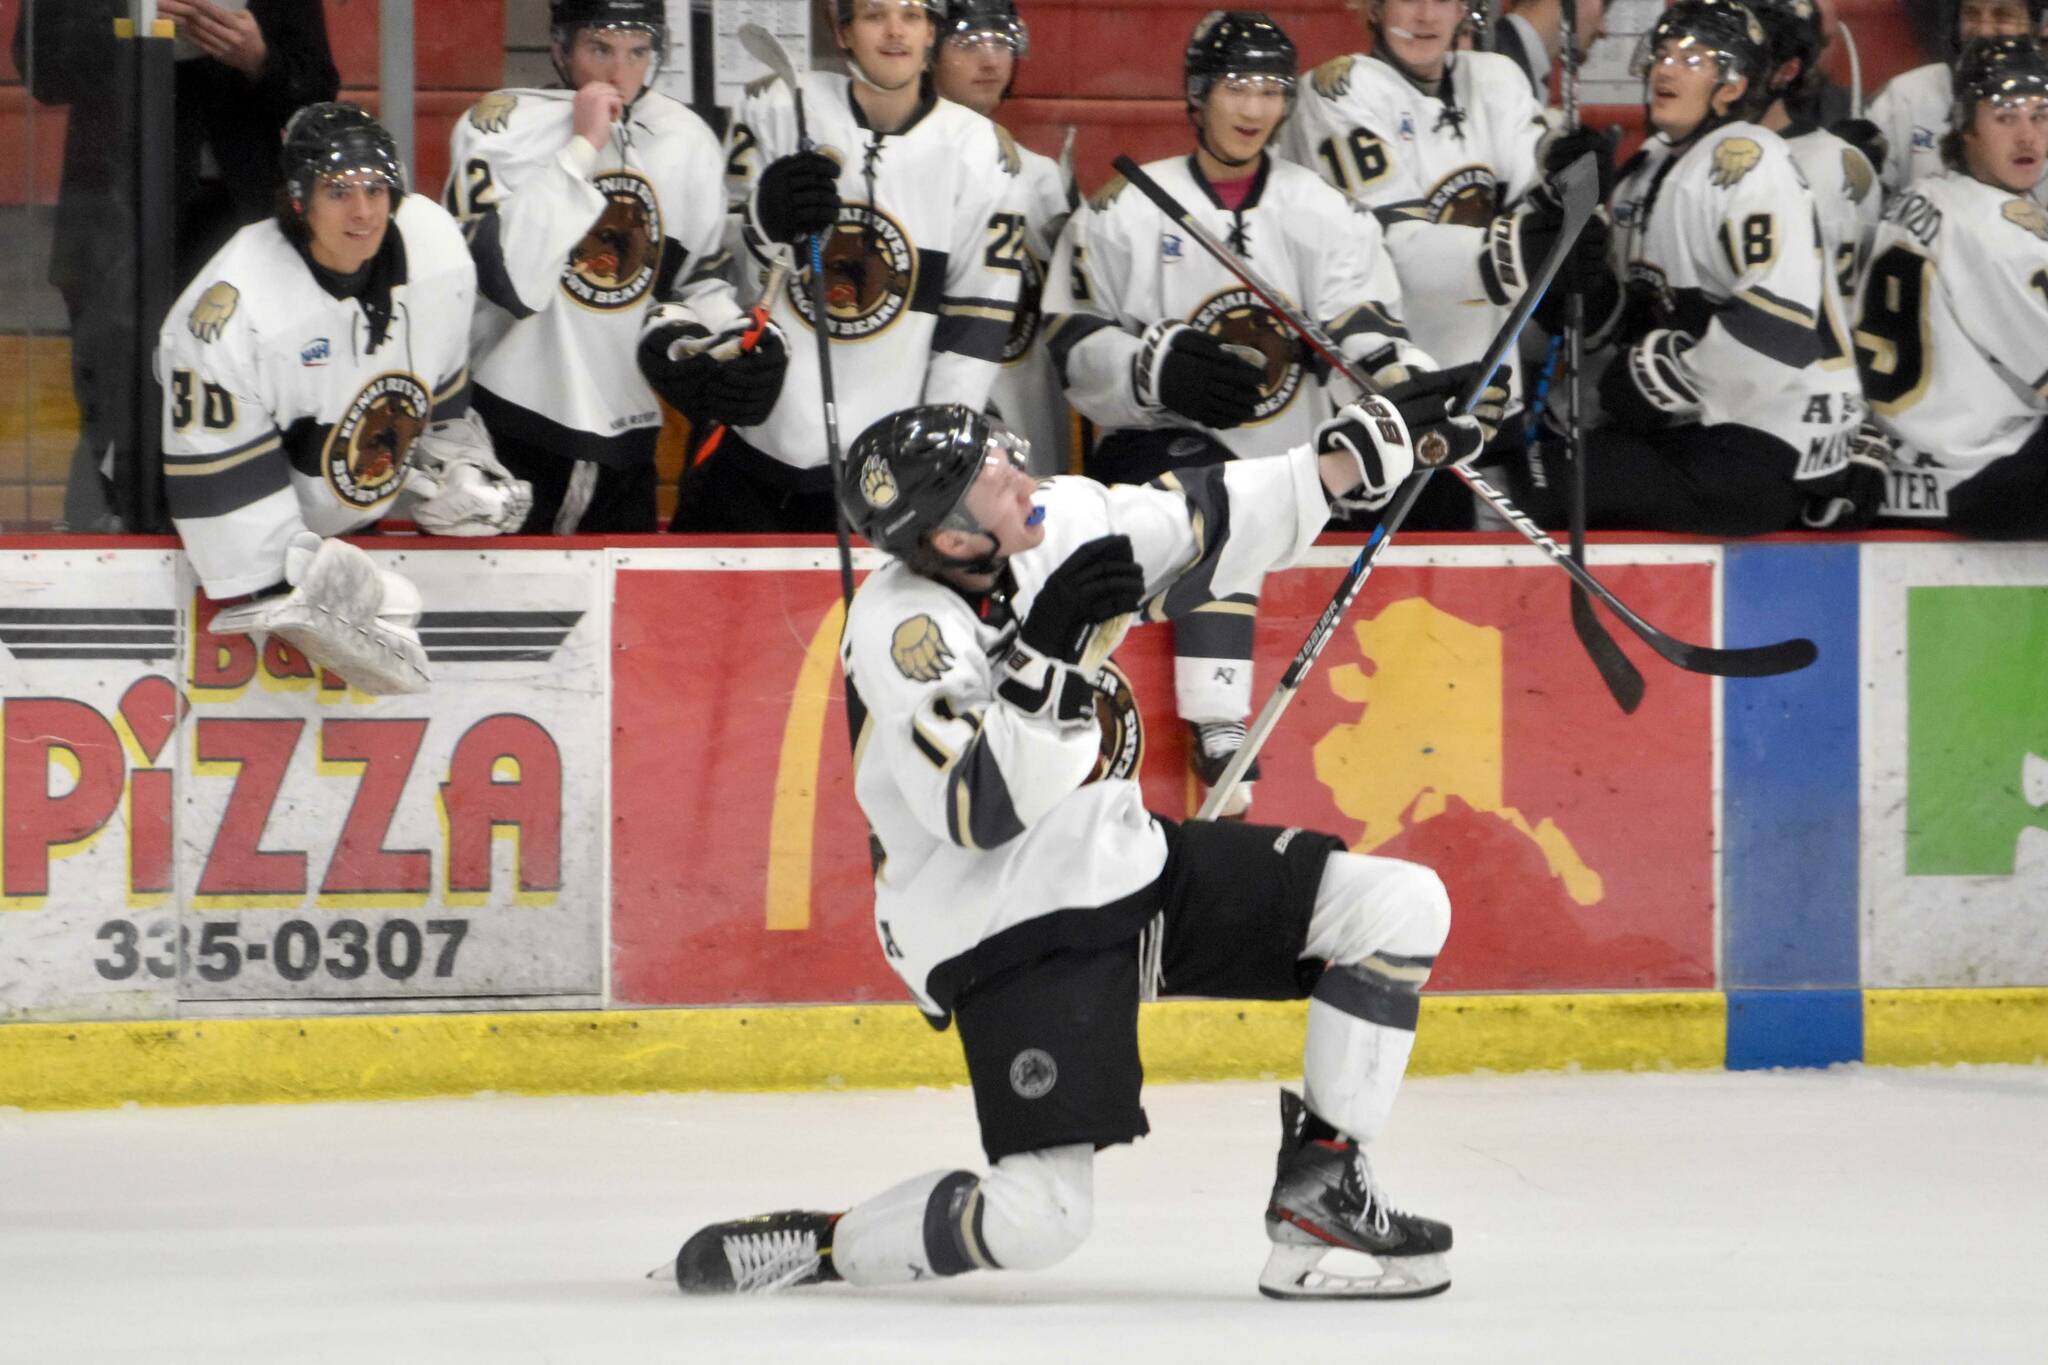 Bryce Monrean of the Kenai River Brown Bears celebrates his second-period goal against the Wisconsin Windigo on Saturday, Oct. 22, 2022, at the Soldotna Regional Sports Complex in Soldotna, Alaska. (Photo by Jeff Helminiak/Peninsula Clarion)